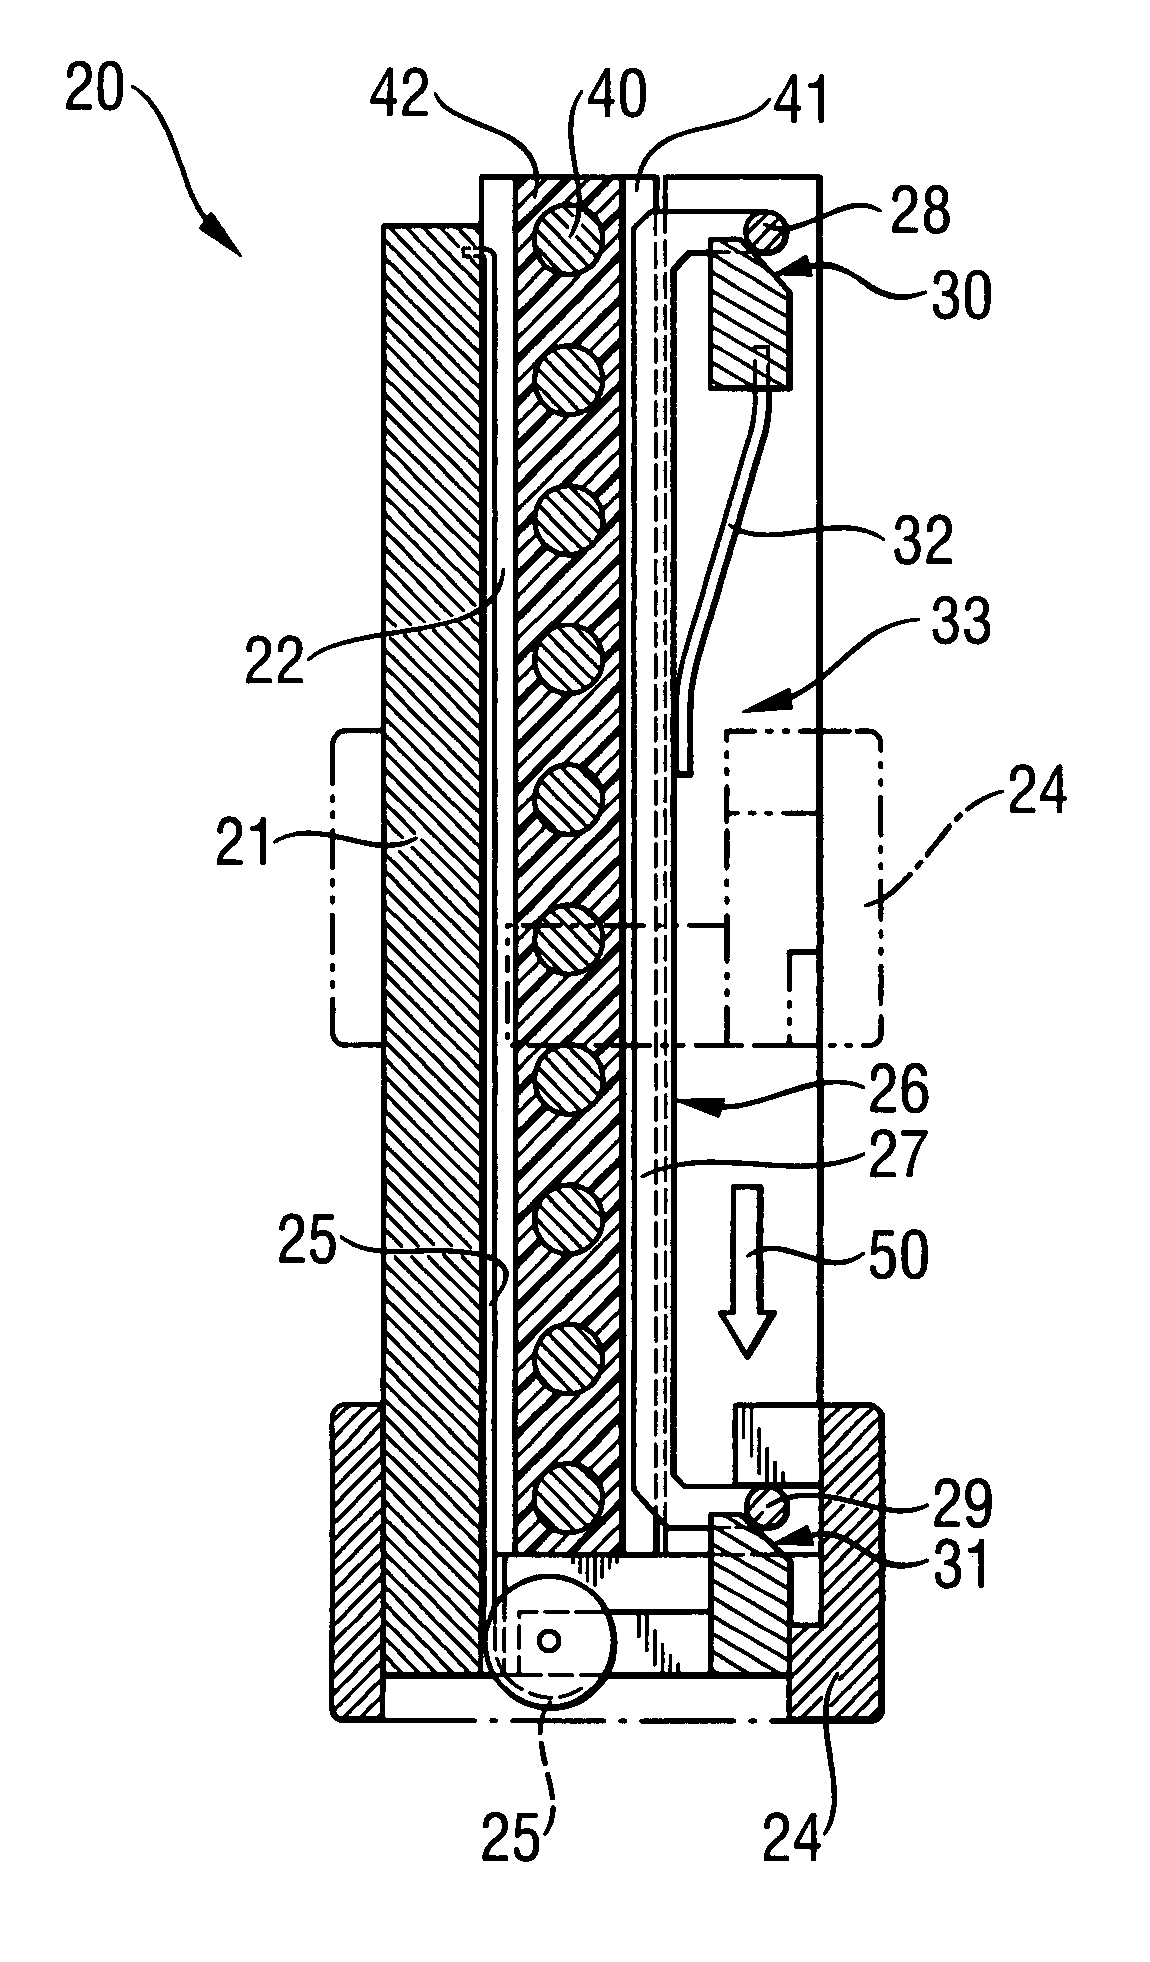 Magazine with fastening elements for a setting tool and a setting tool with the magazine with fastening elements